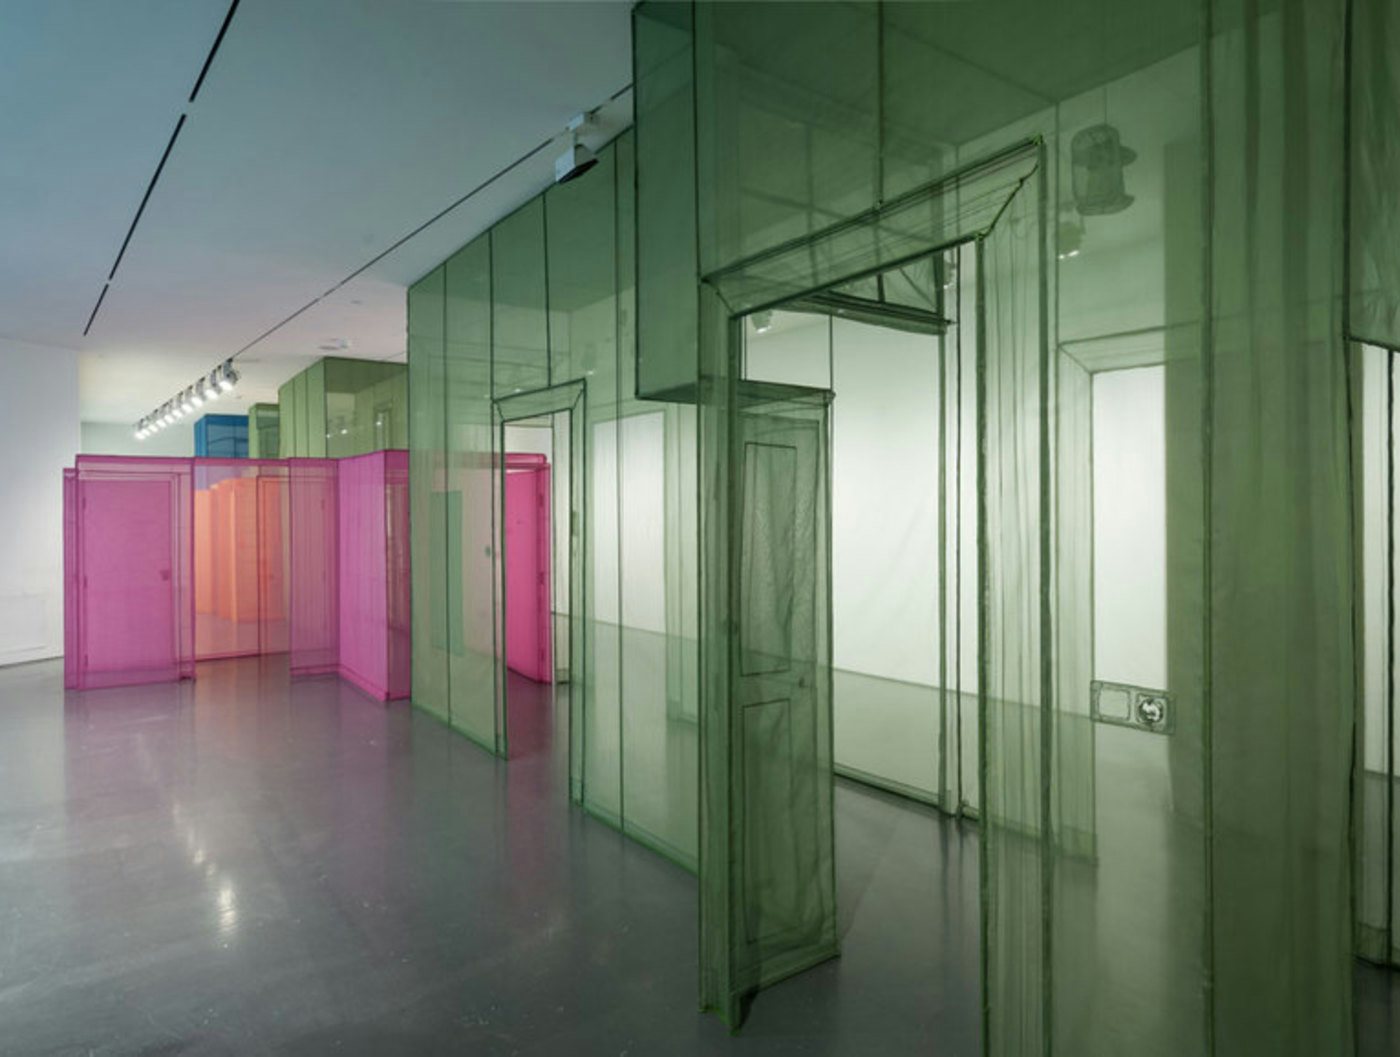 Movements: SCPA Dance responds to Do Ho Suh